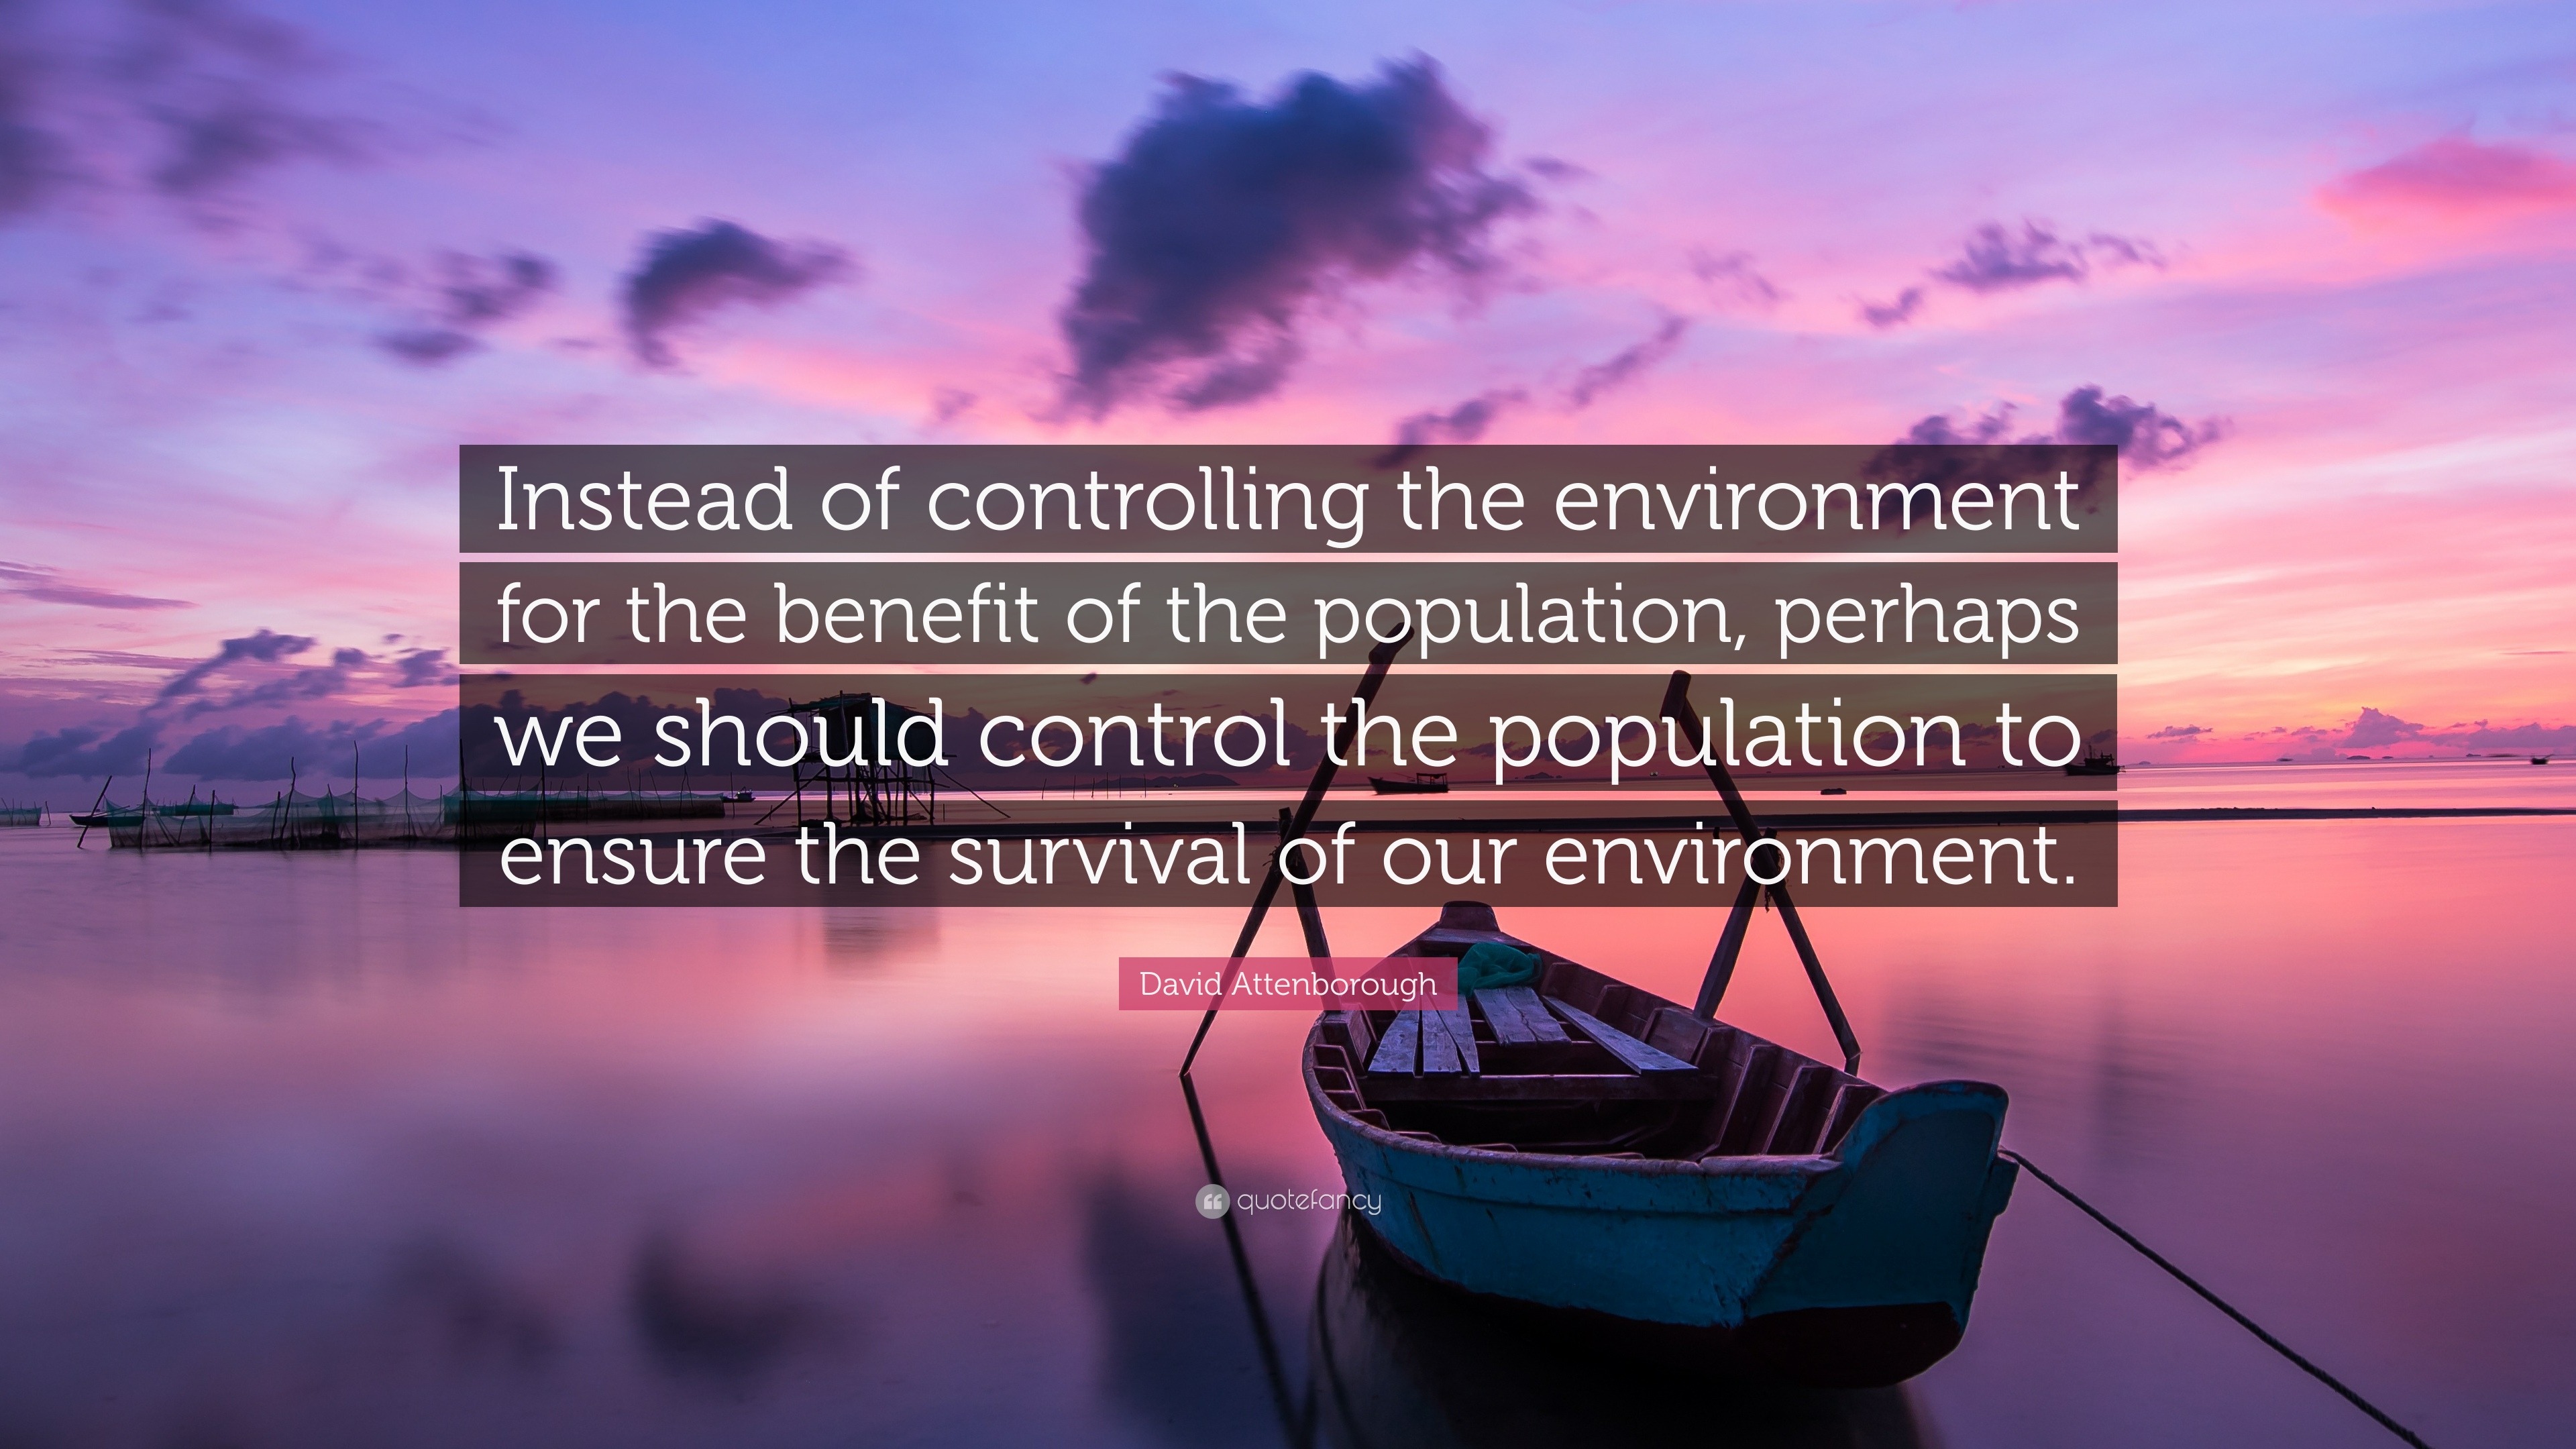 David Attenborough Quote: “Instead of controlling the environment for